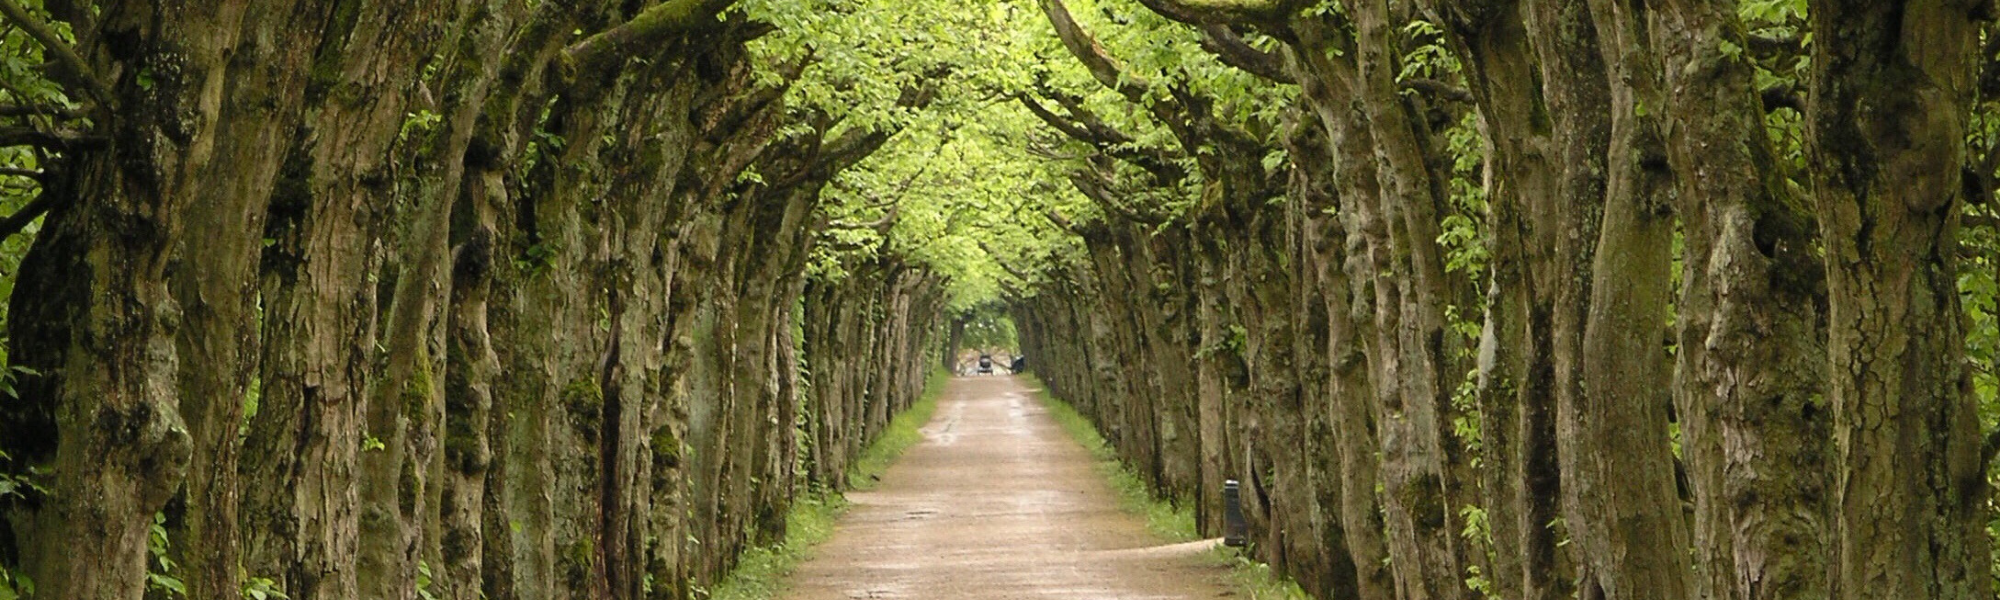 A long and winding road between a row of trees